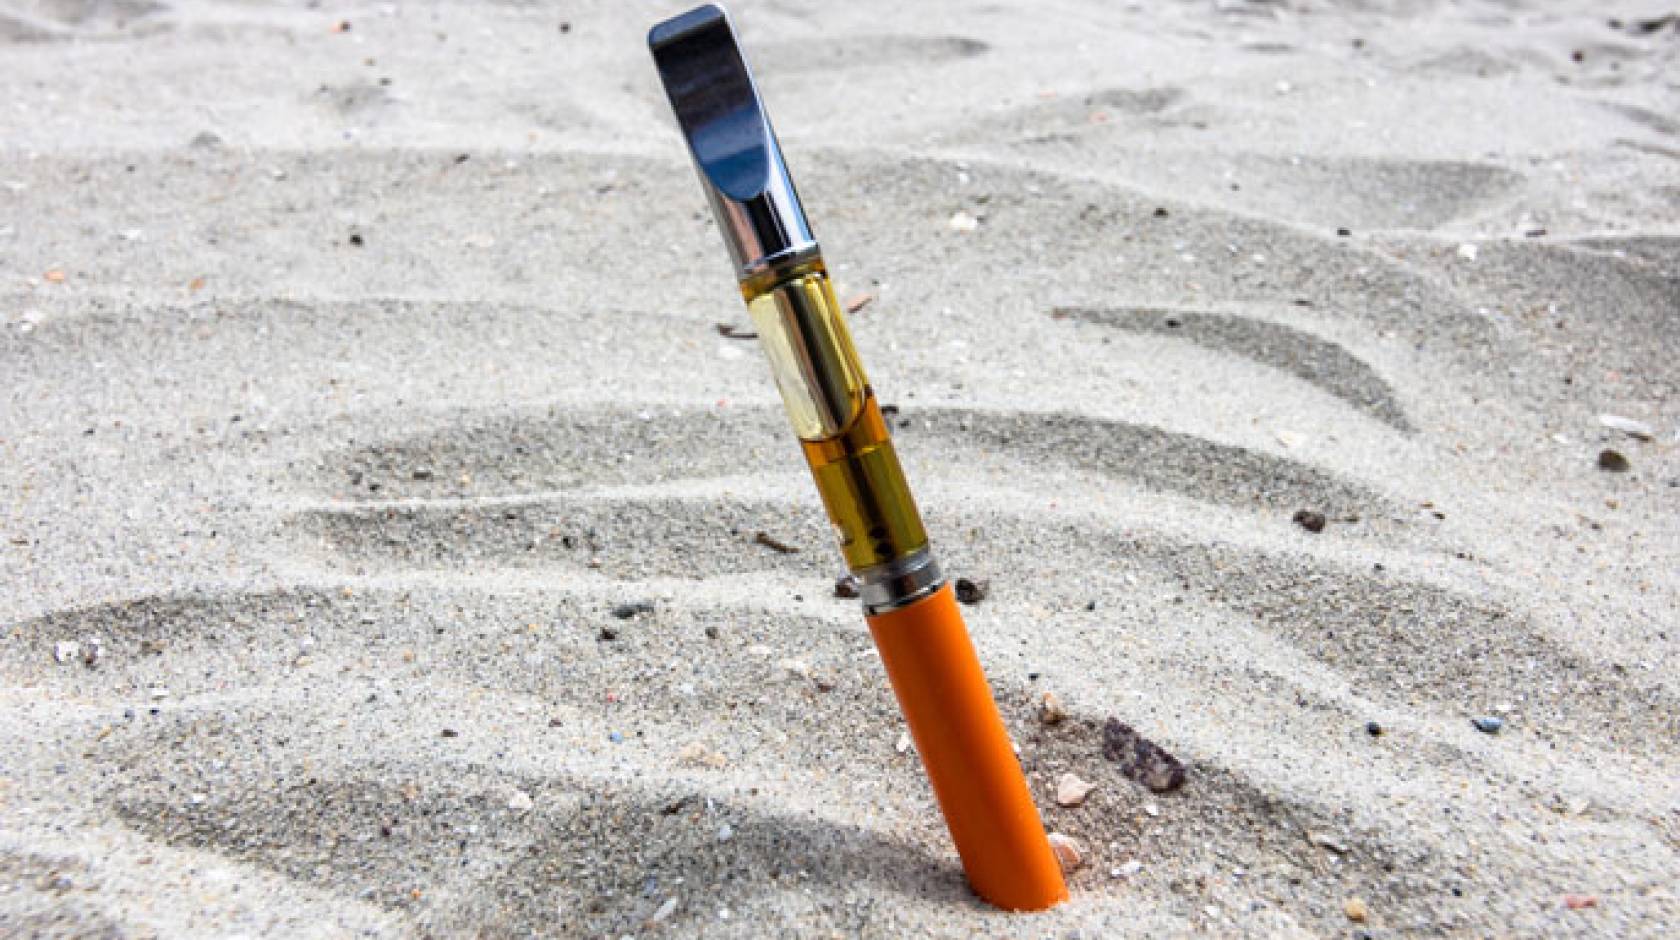 E-cigarettes and a new threat: How to dispose of them | University of  California